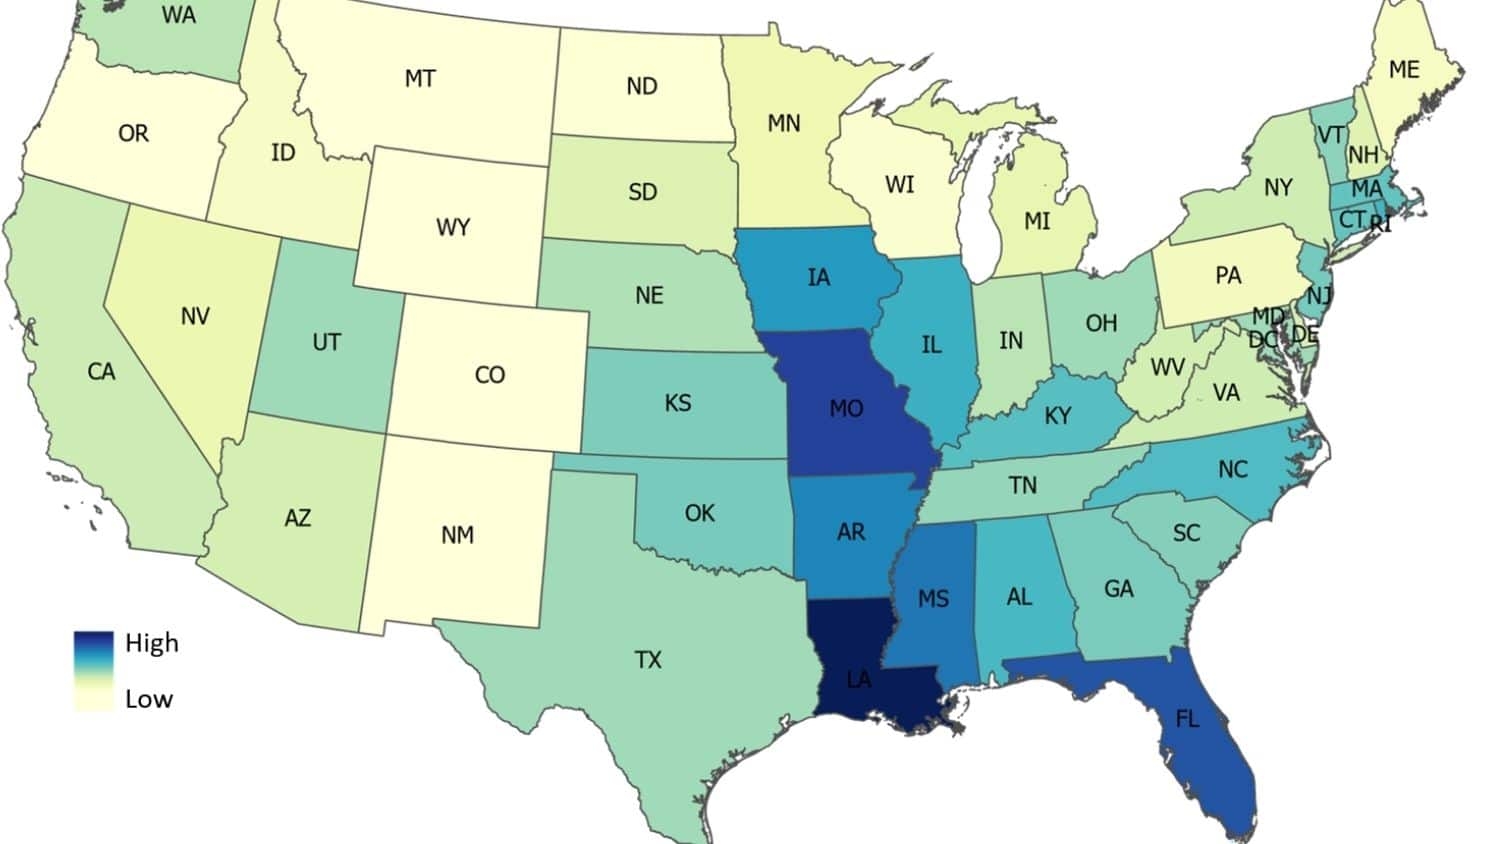 Map of the United States - Study: Flood Damage Risk Is Underestimated Across the US - College of Natural Resources News NC State University